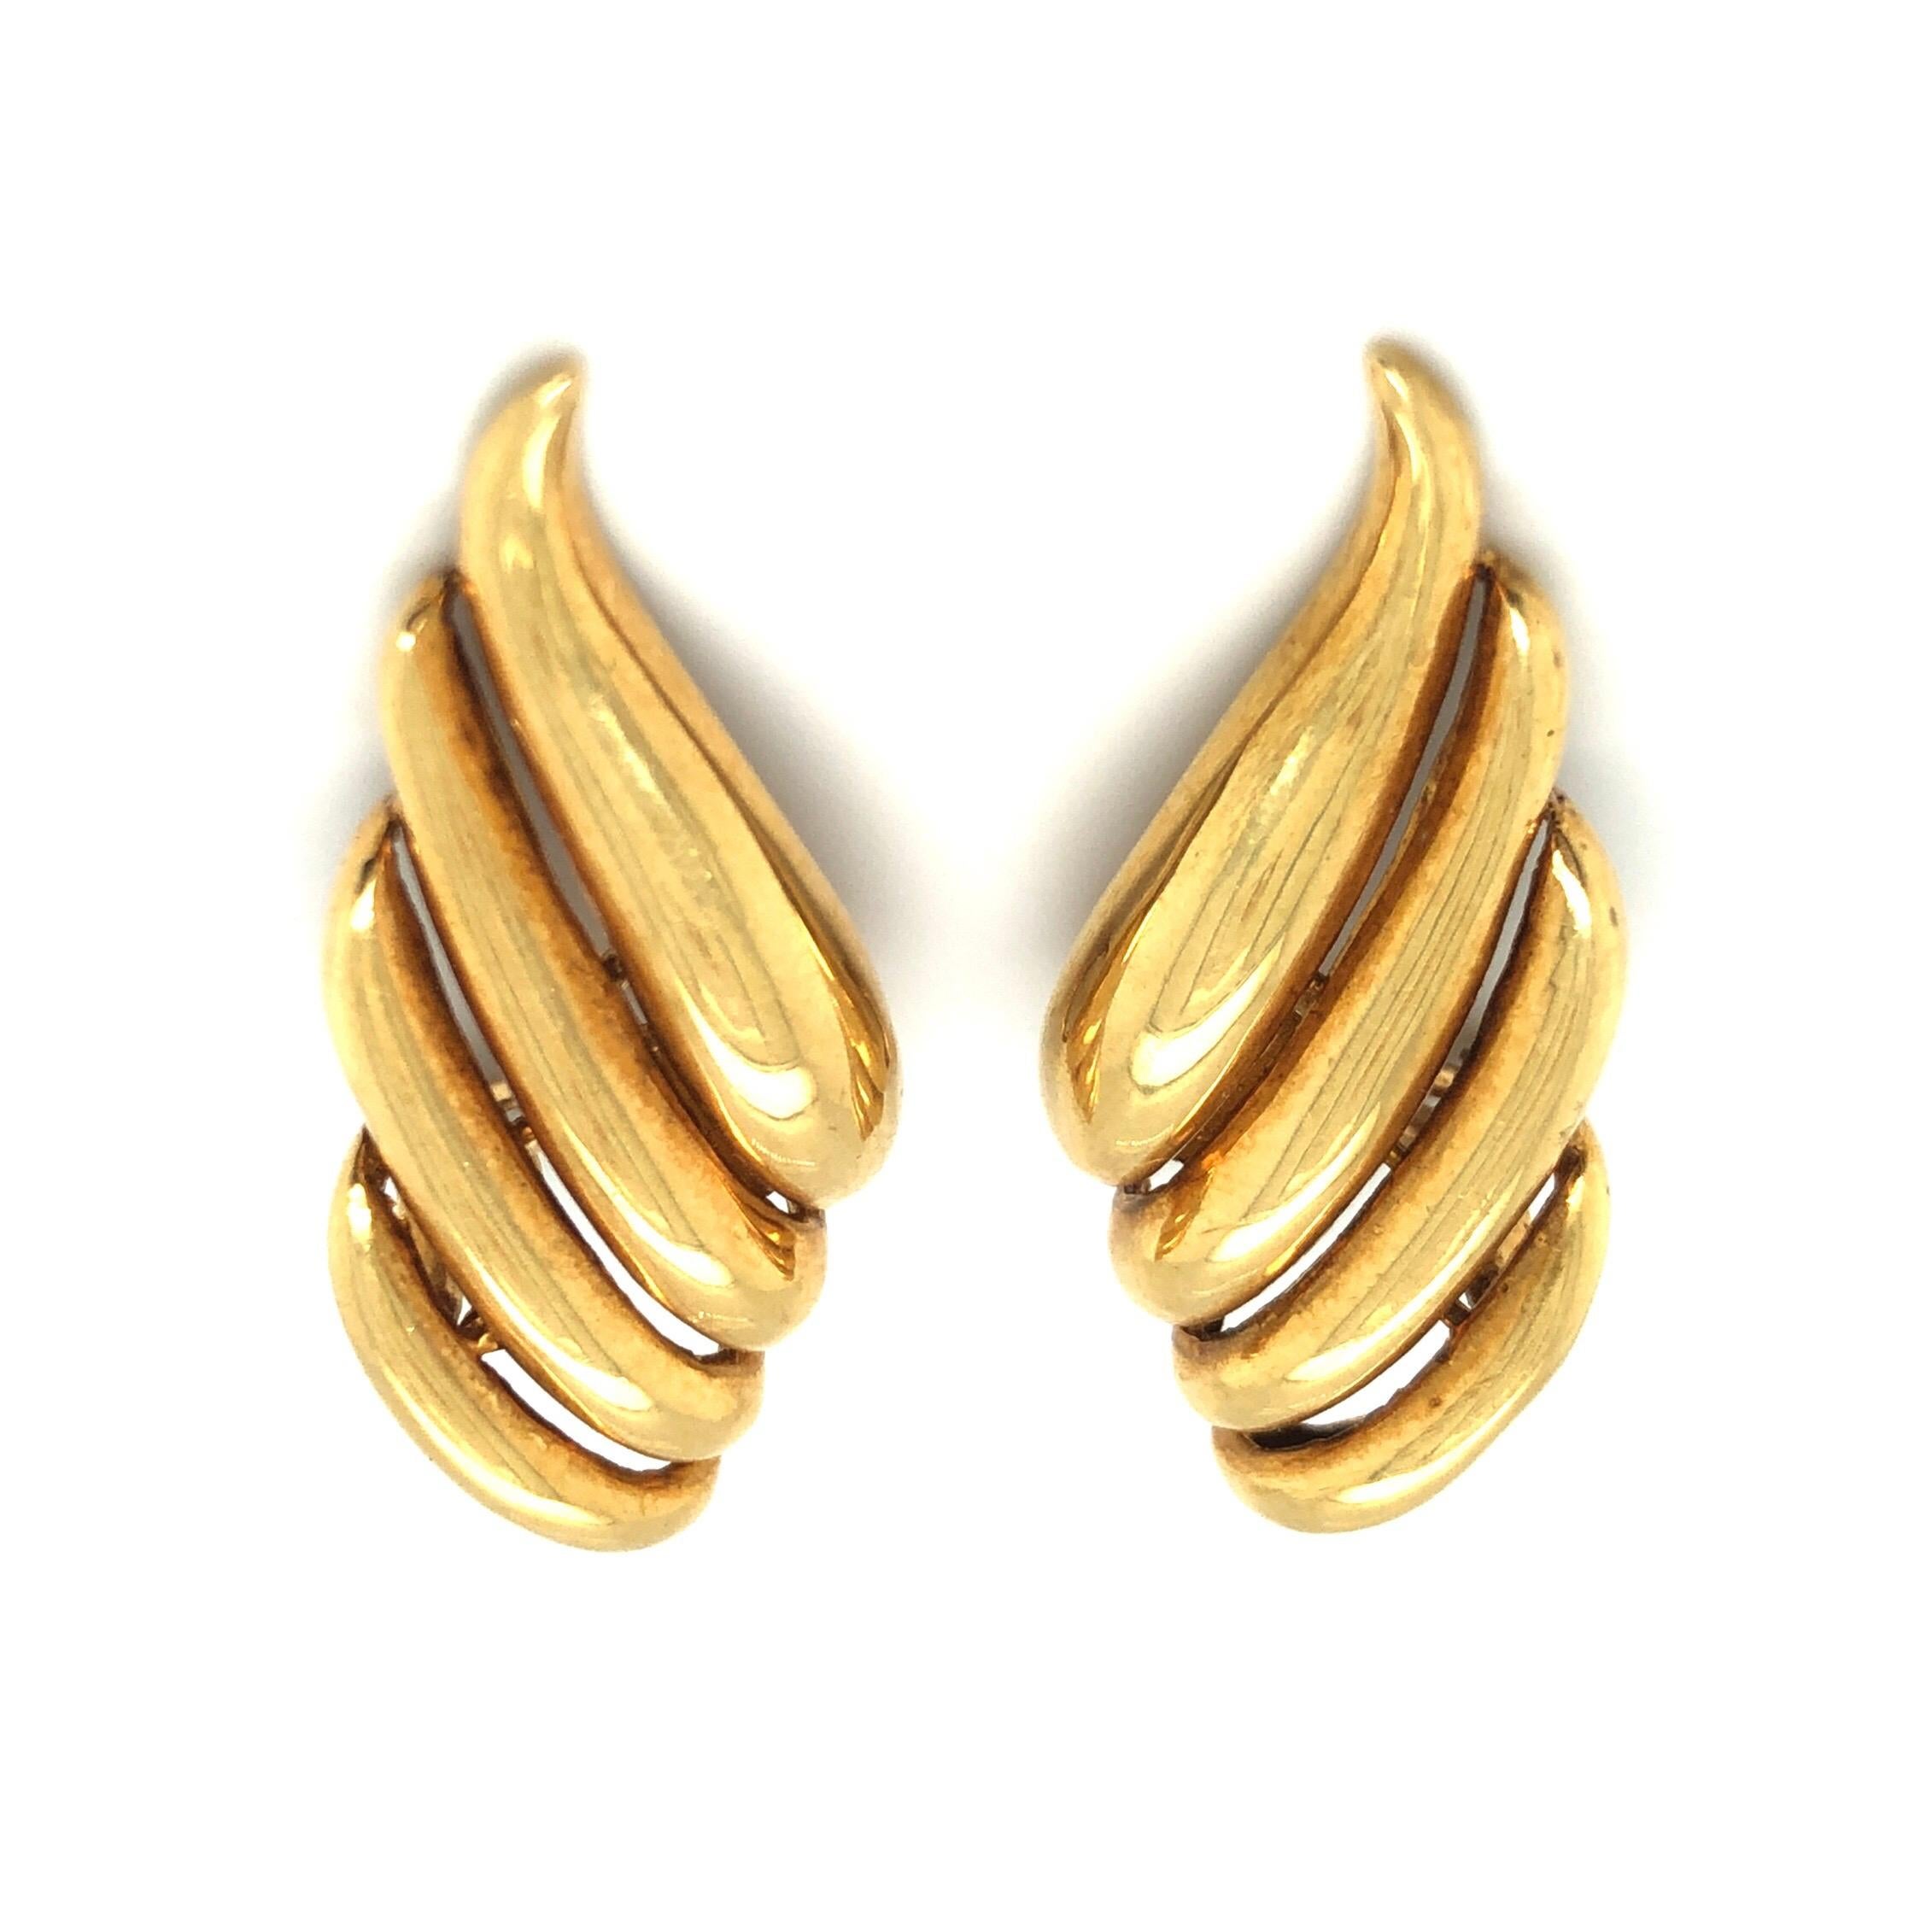 18 karat yellow gold angel wings ear clips.
Fabulous ear clips featuring a pair of open wings crafted in 18 karat yellow gold and completed by hinged omega clip-backs.
These truly eye-catching ear clips are comfortable and easy to wear day and